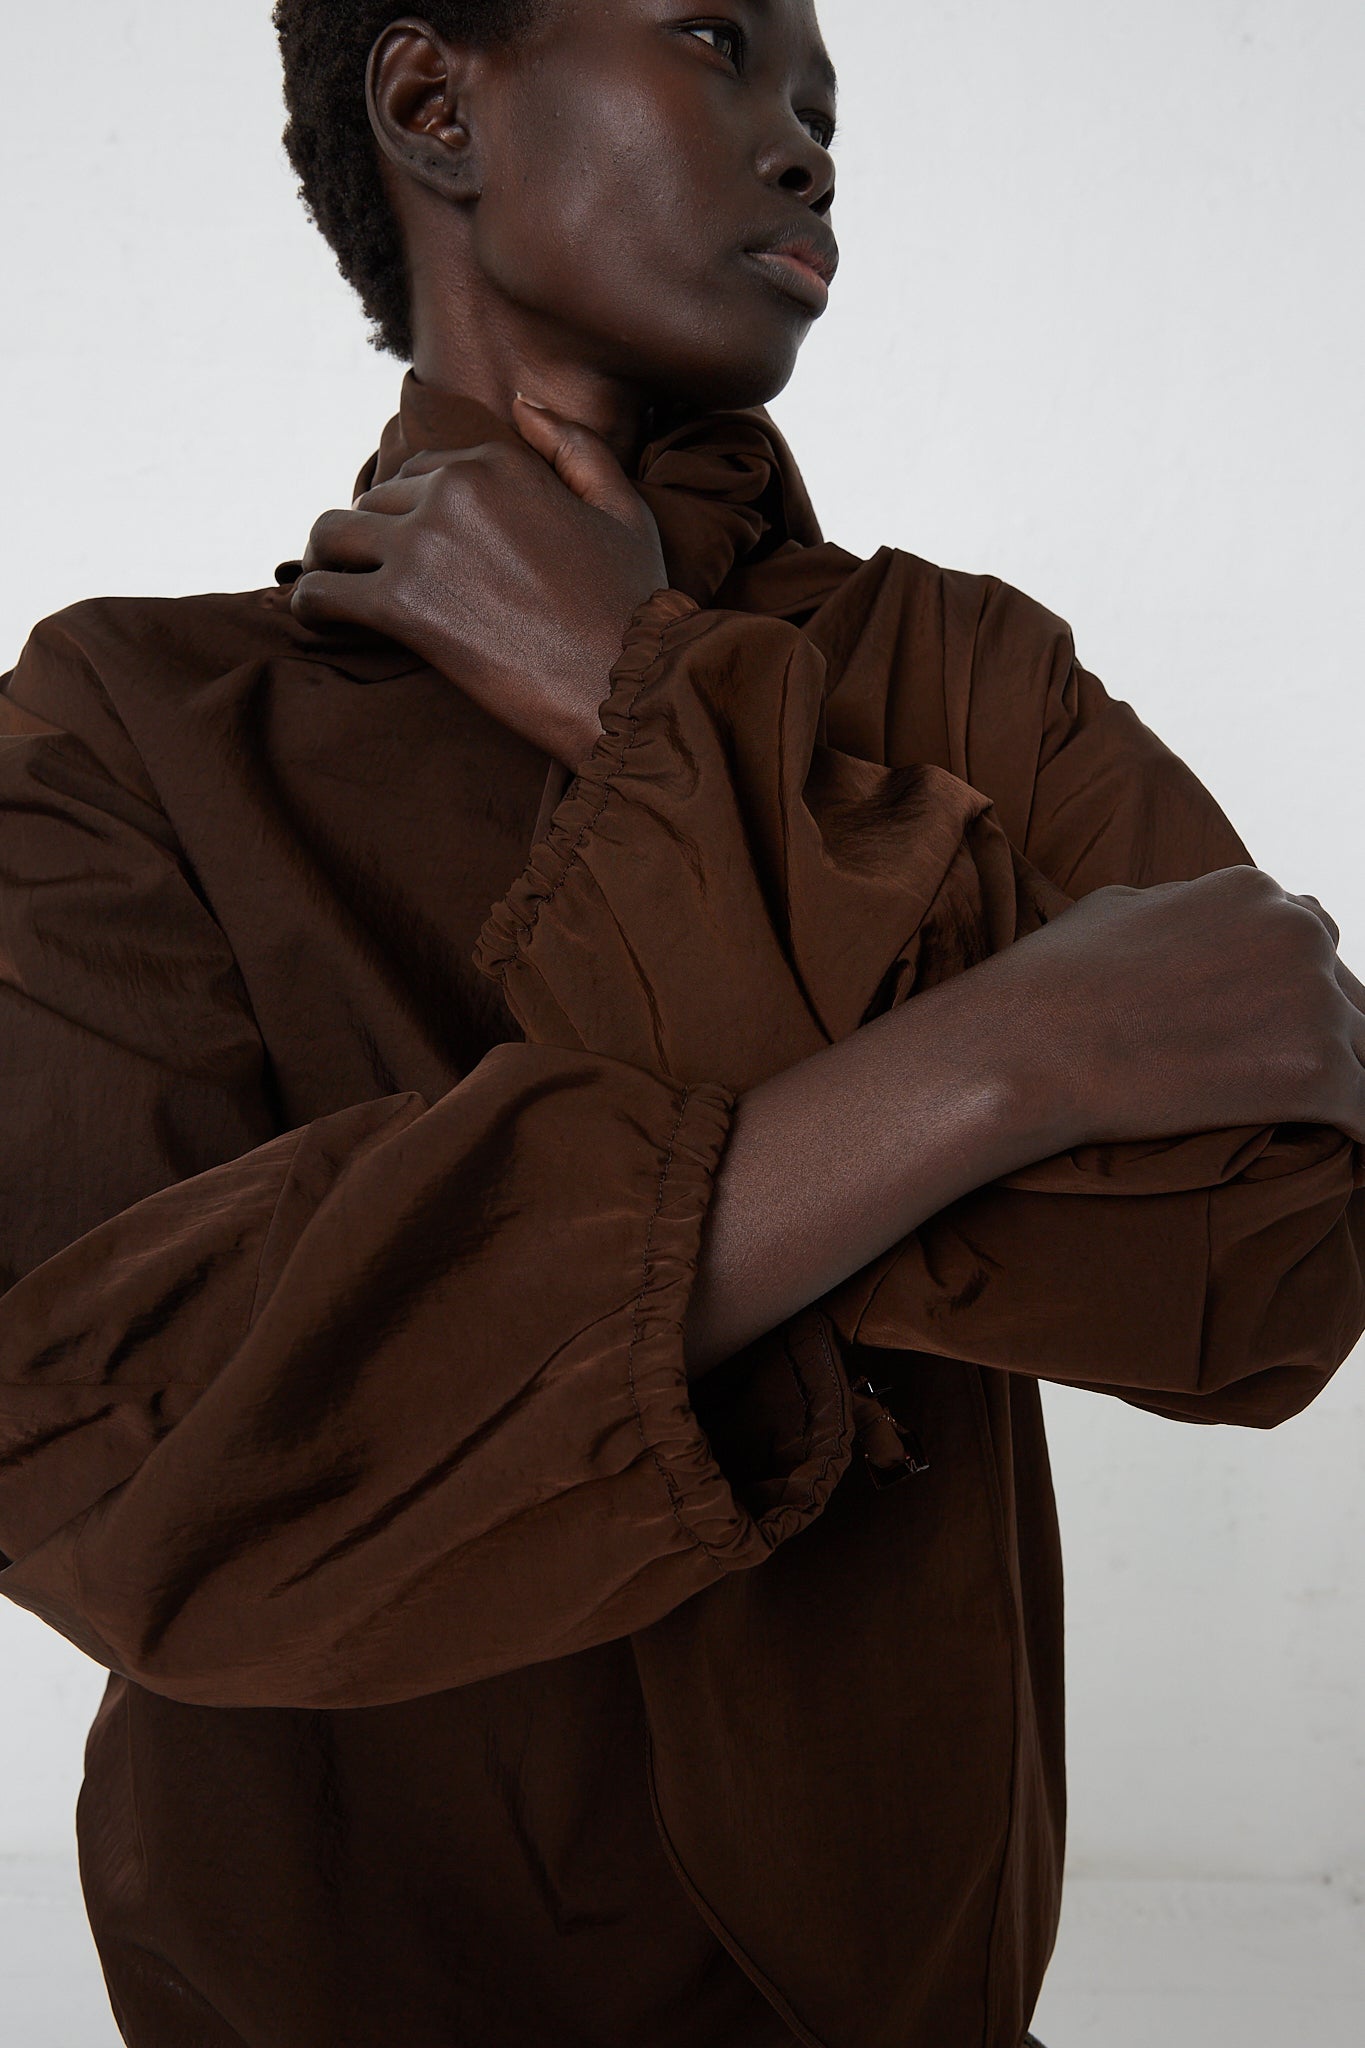 A woman in a brown shirt posing in front of a white background wearing the Veronique Leroy Zipped on Sleeve Rain Blouse in Choco.